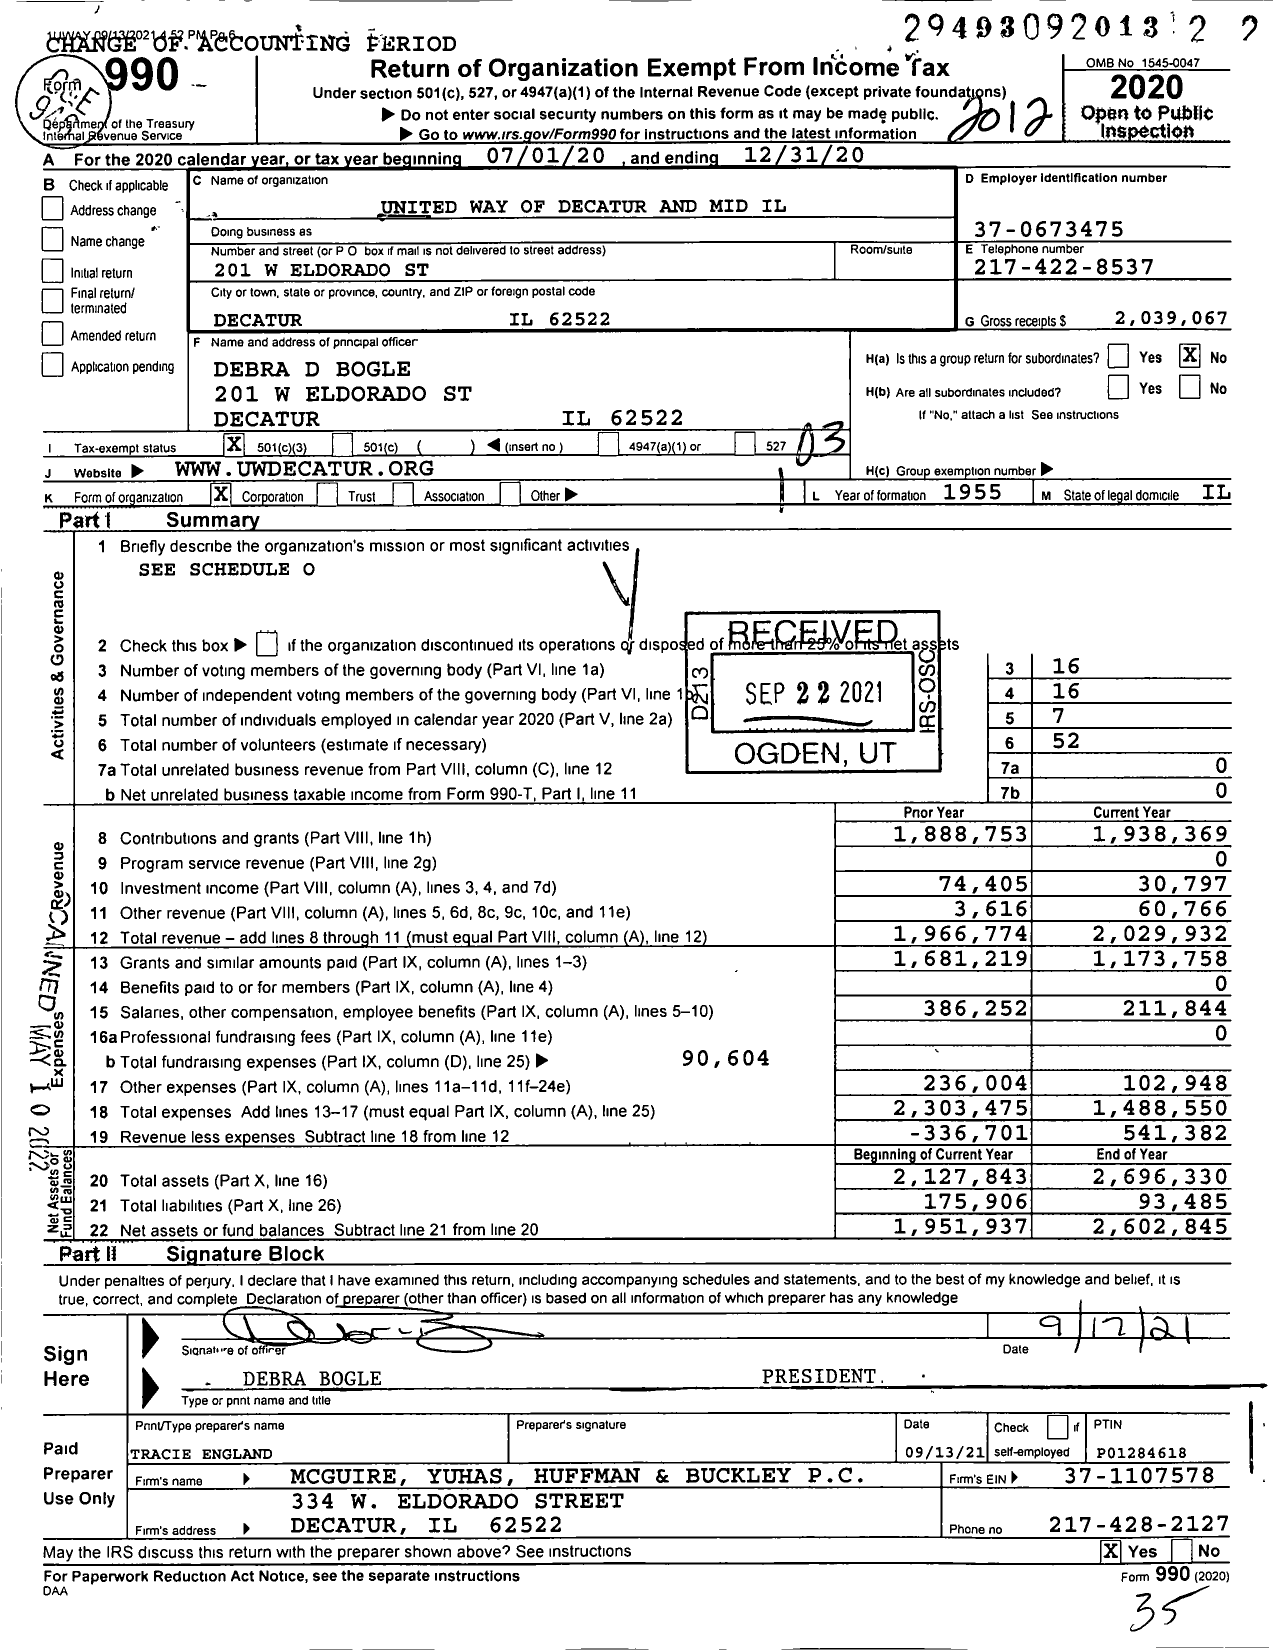 Image of first page of 2020 Form 990 for United Way of Decatur and Mid Il